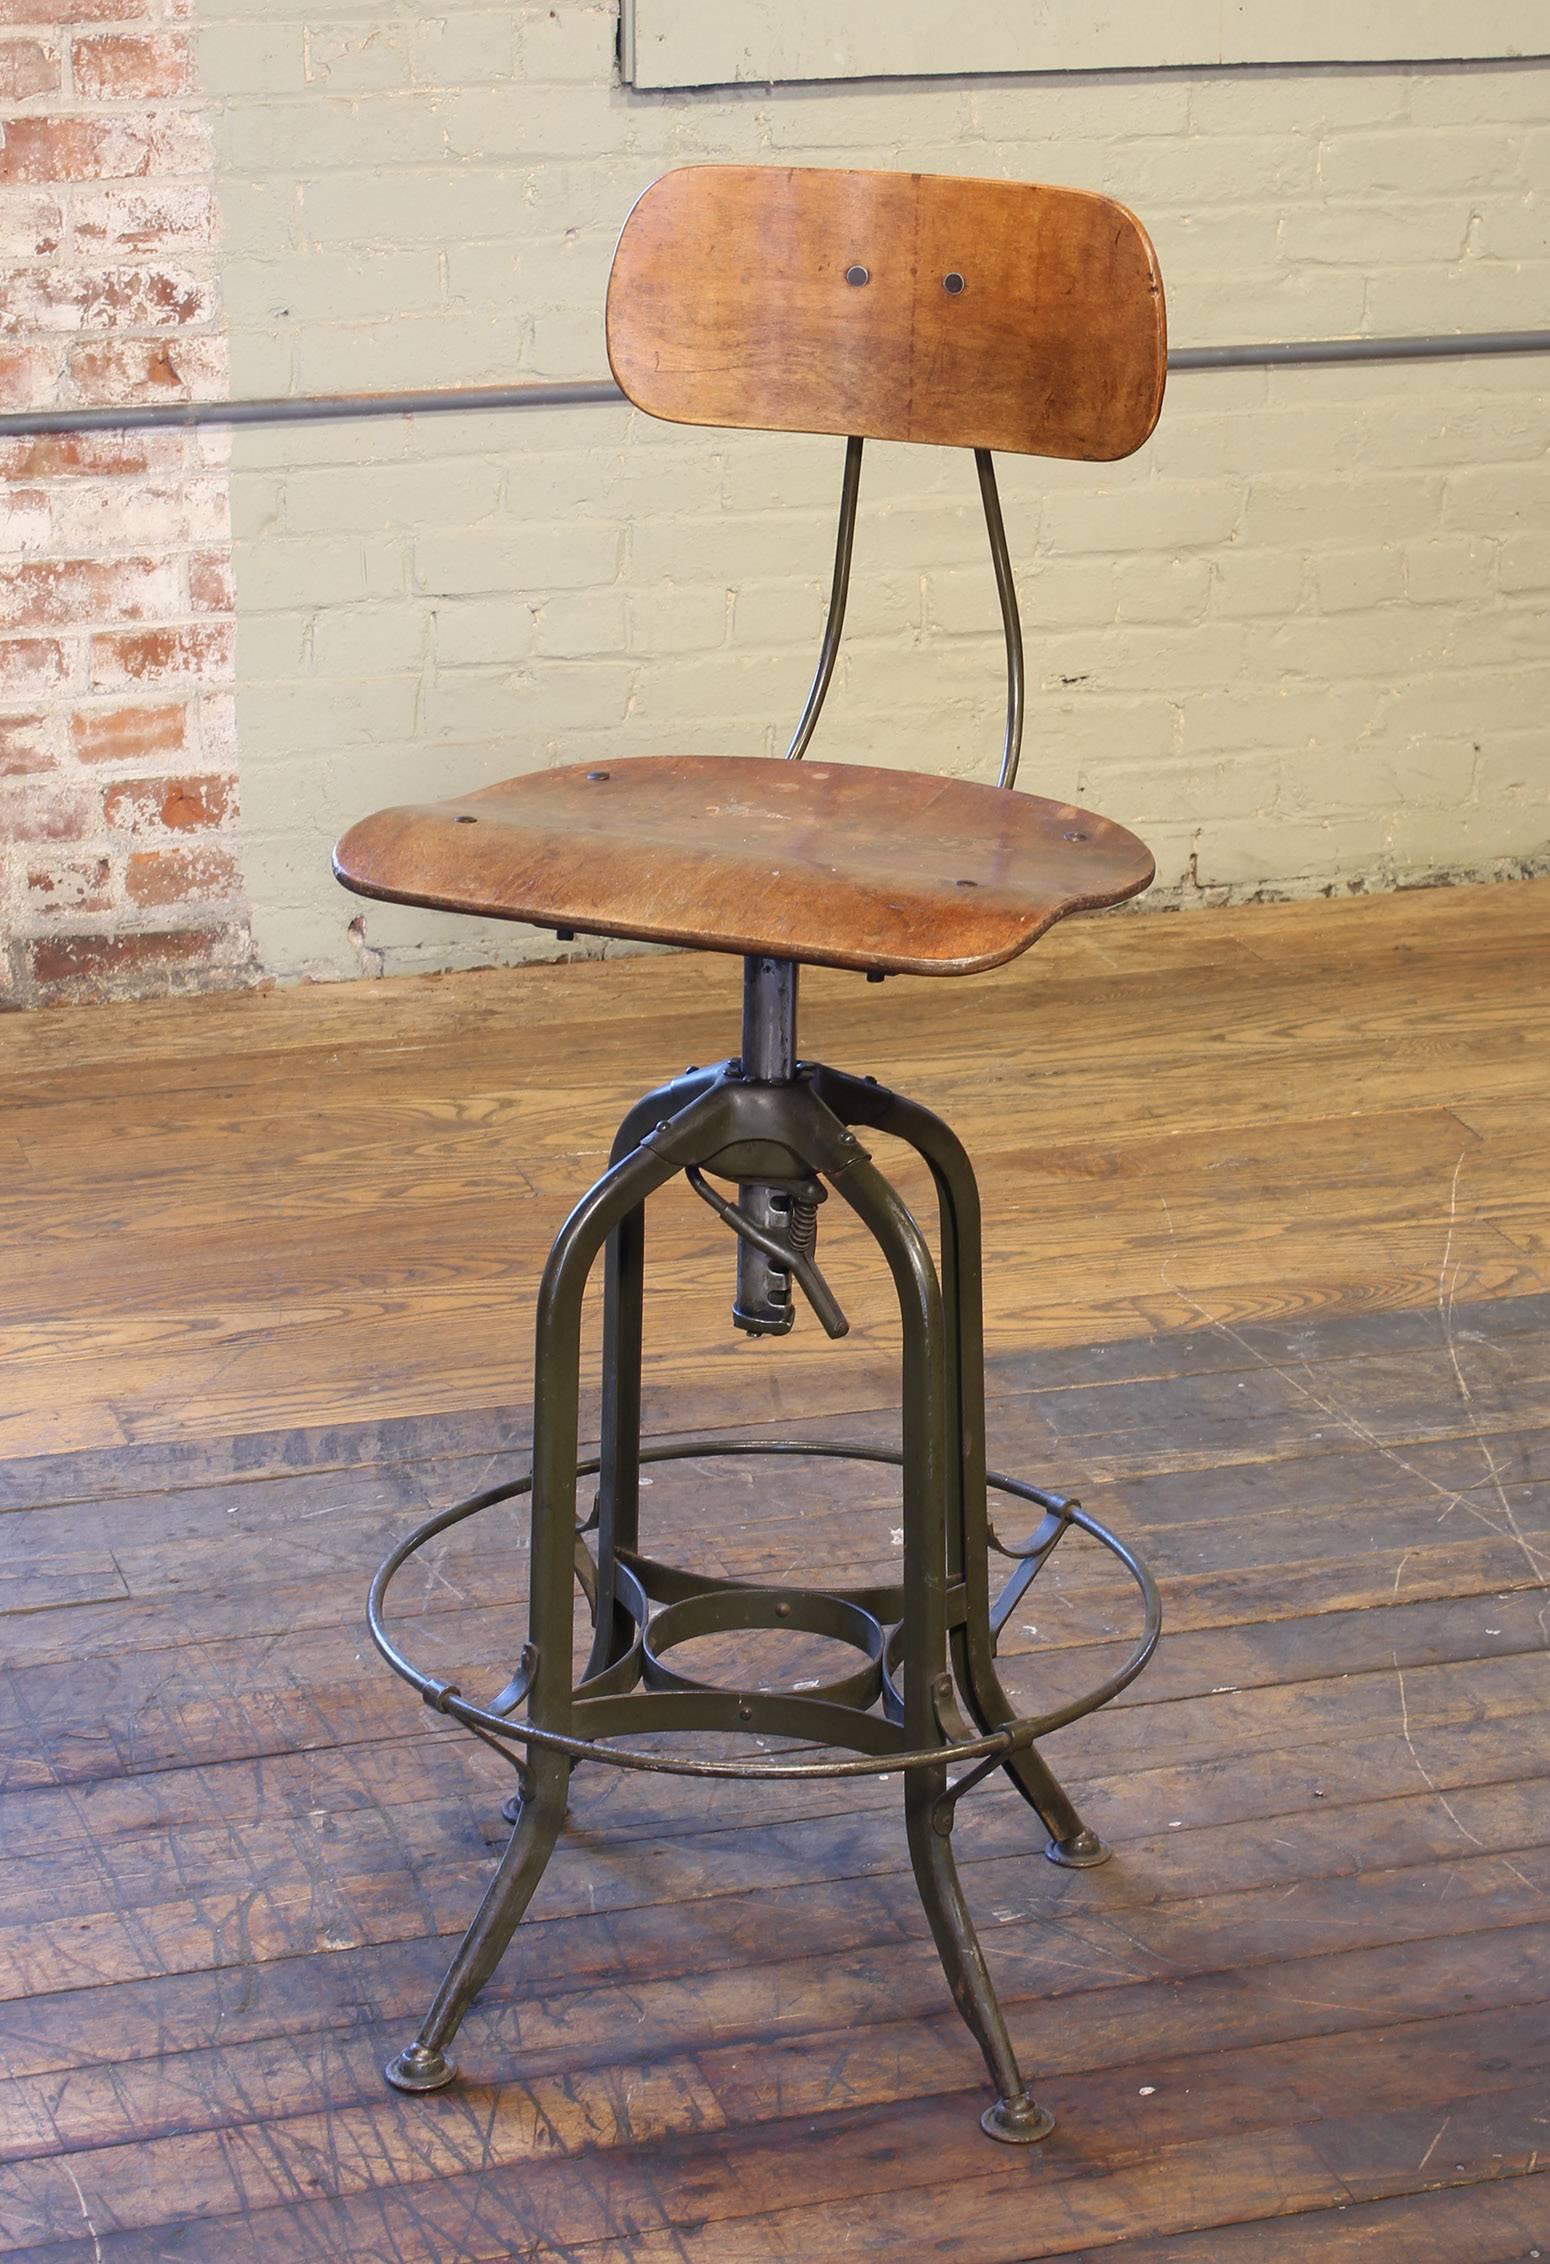 Authentic original adjustable Toledo bar stool. Bent plywood seat and back, distressed military green painted steel frame. Seat ring diameter measures 18